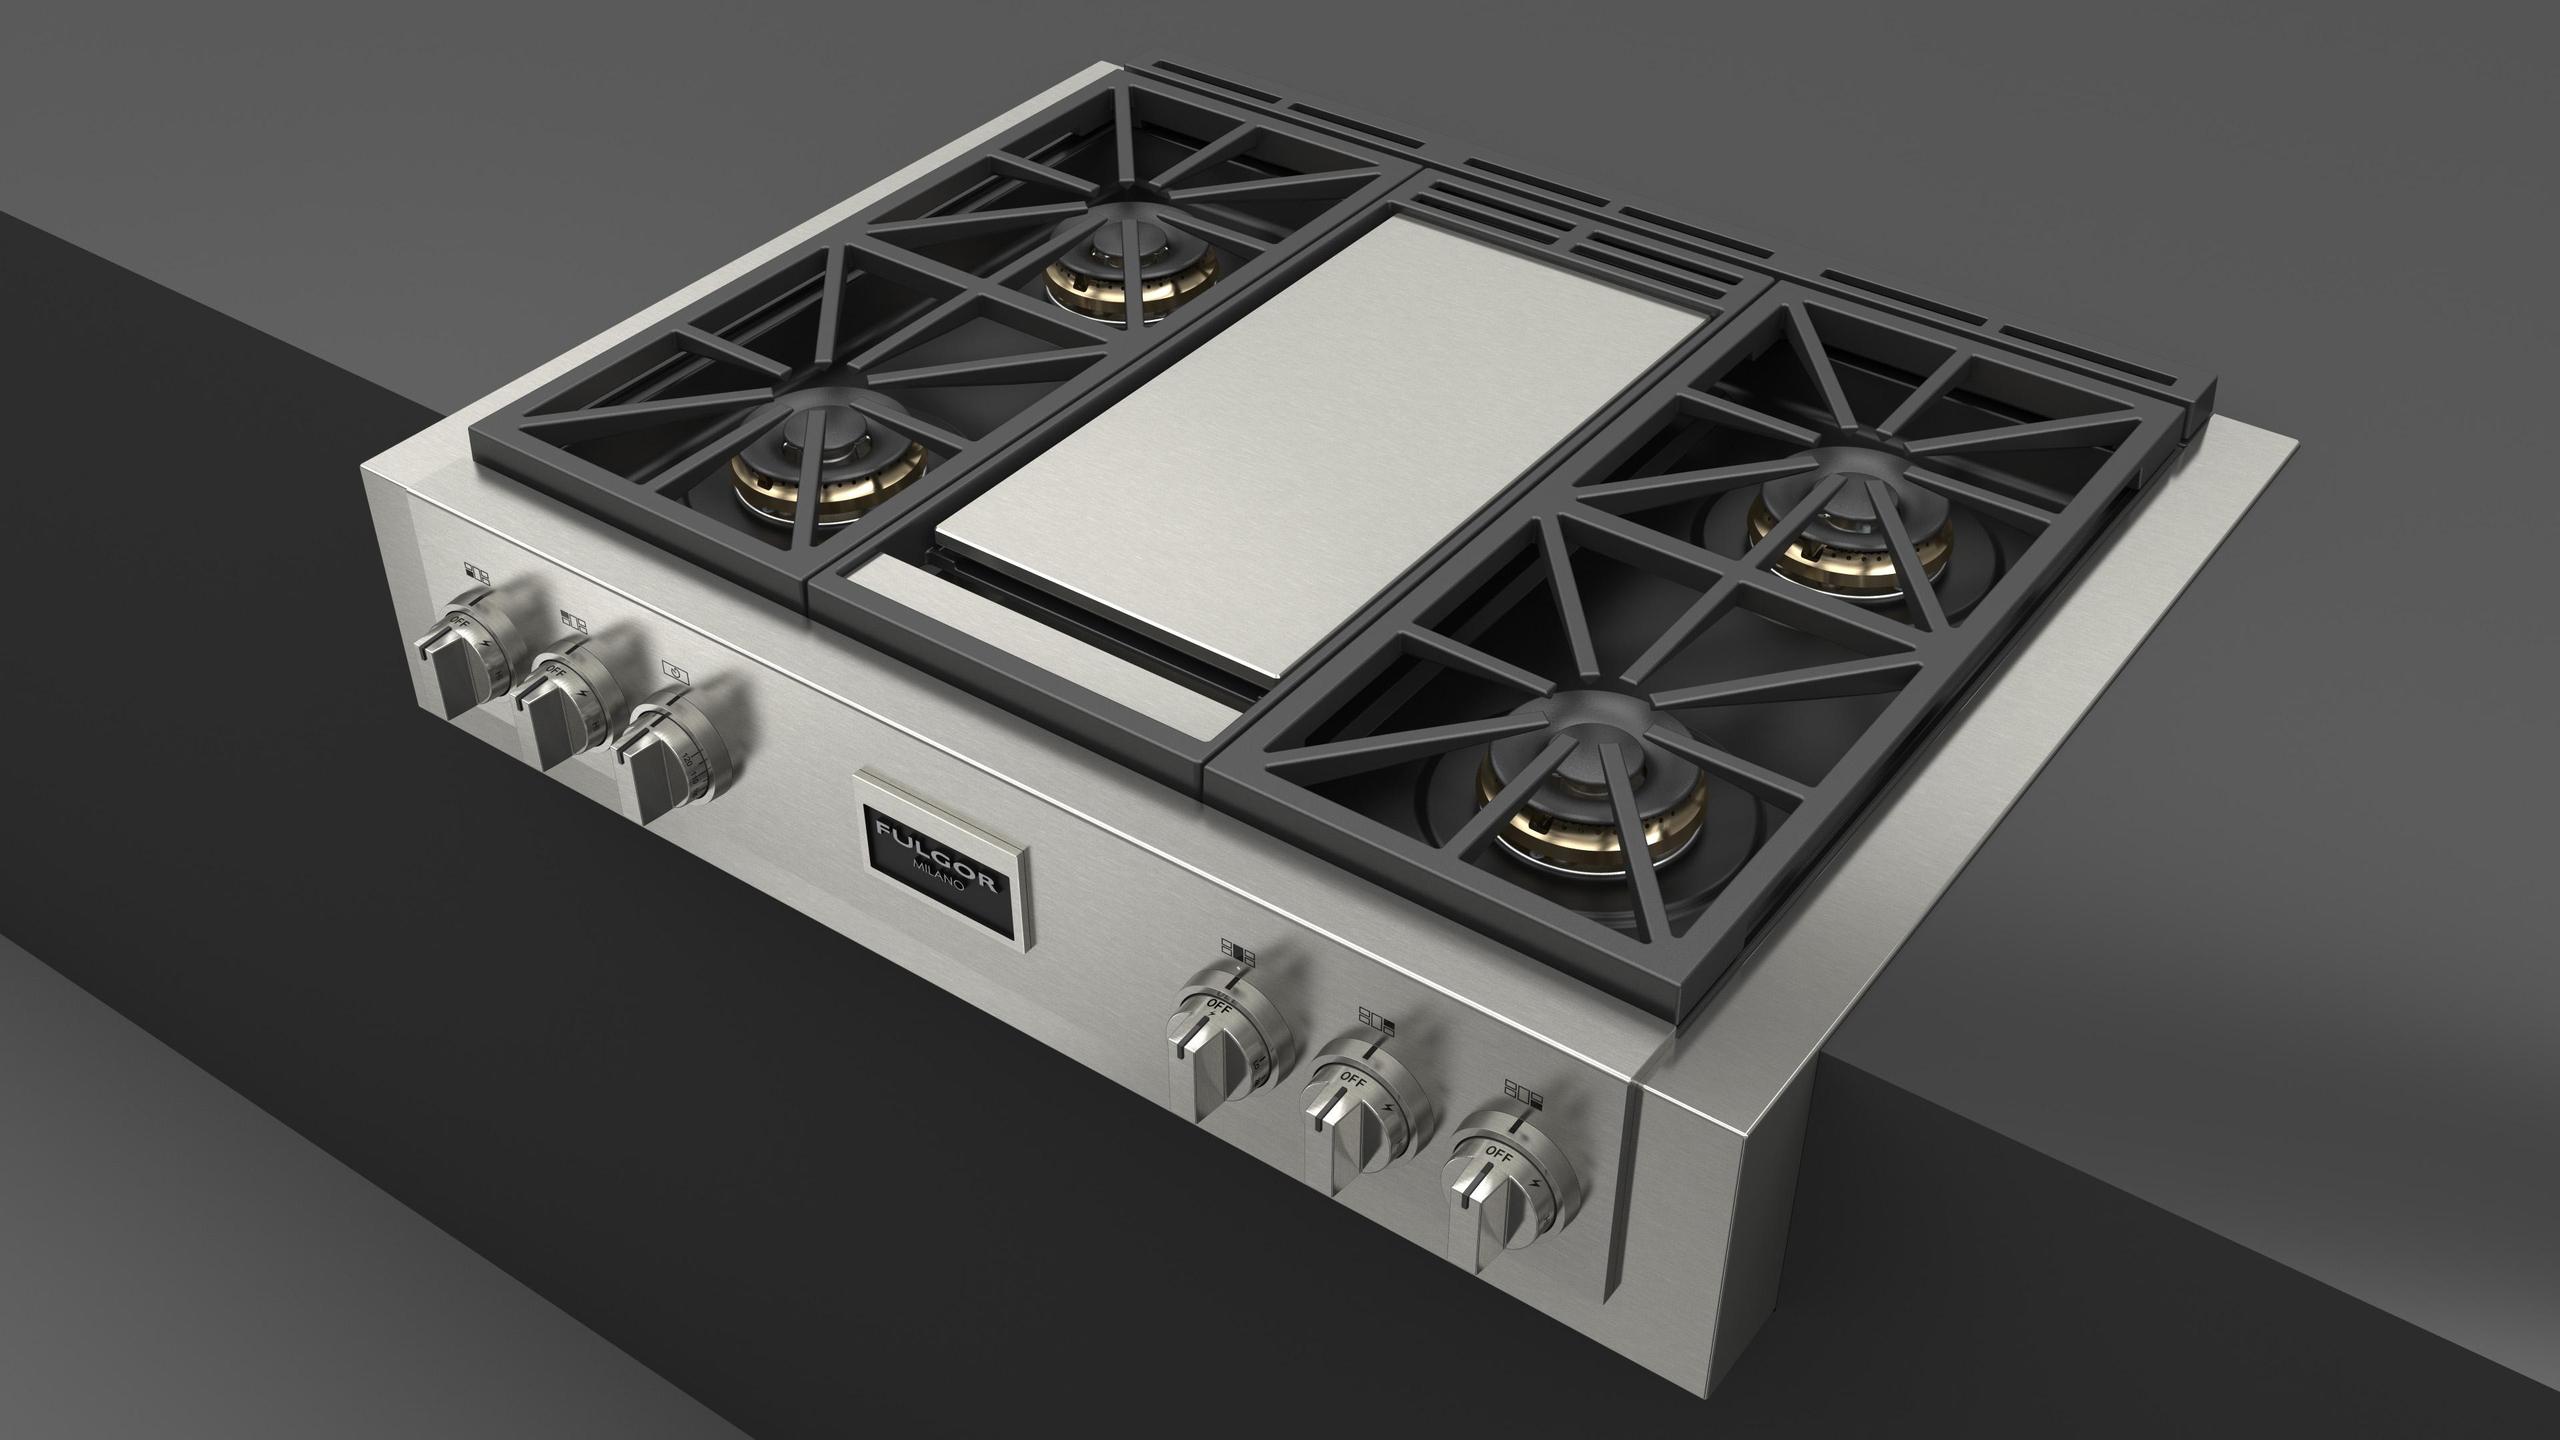 SOFIA 36" PRO GAS RANGETOP WITH GRIDDLE